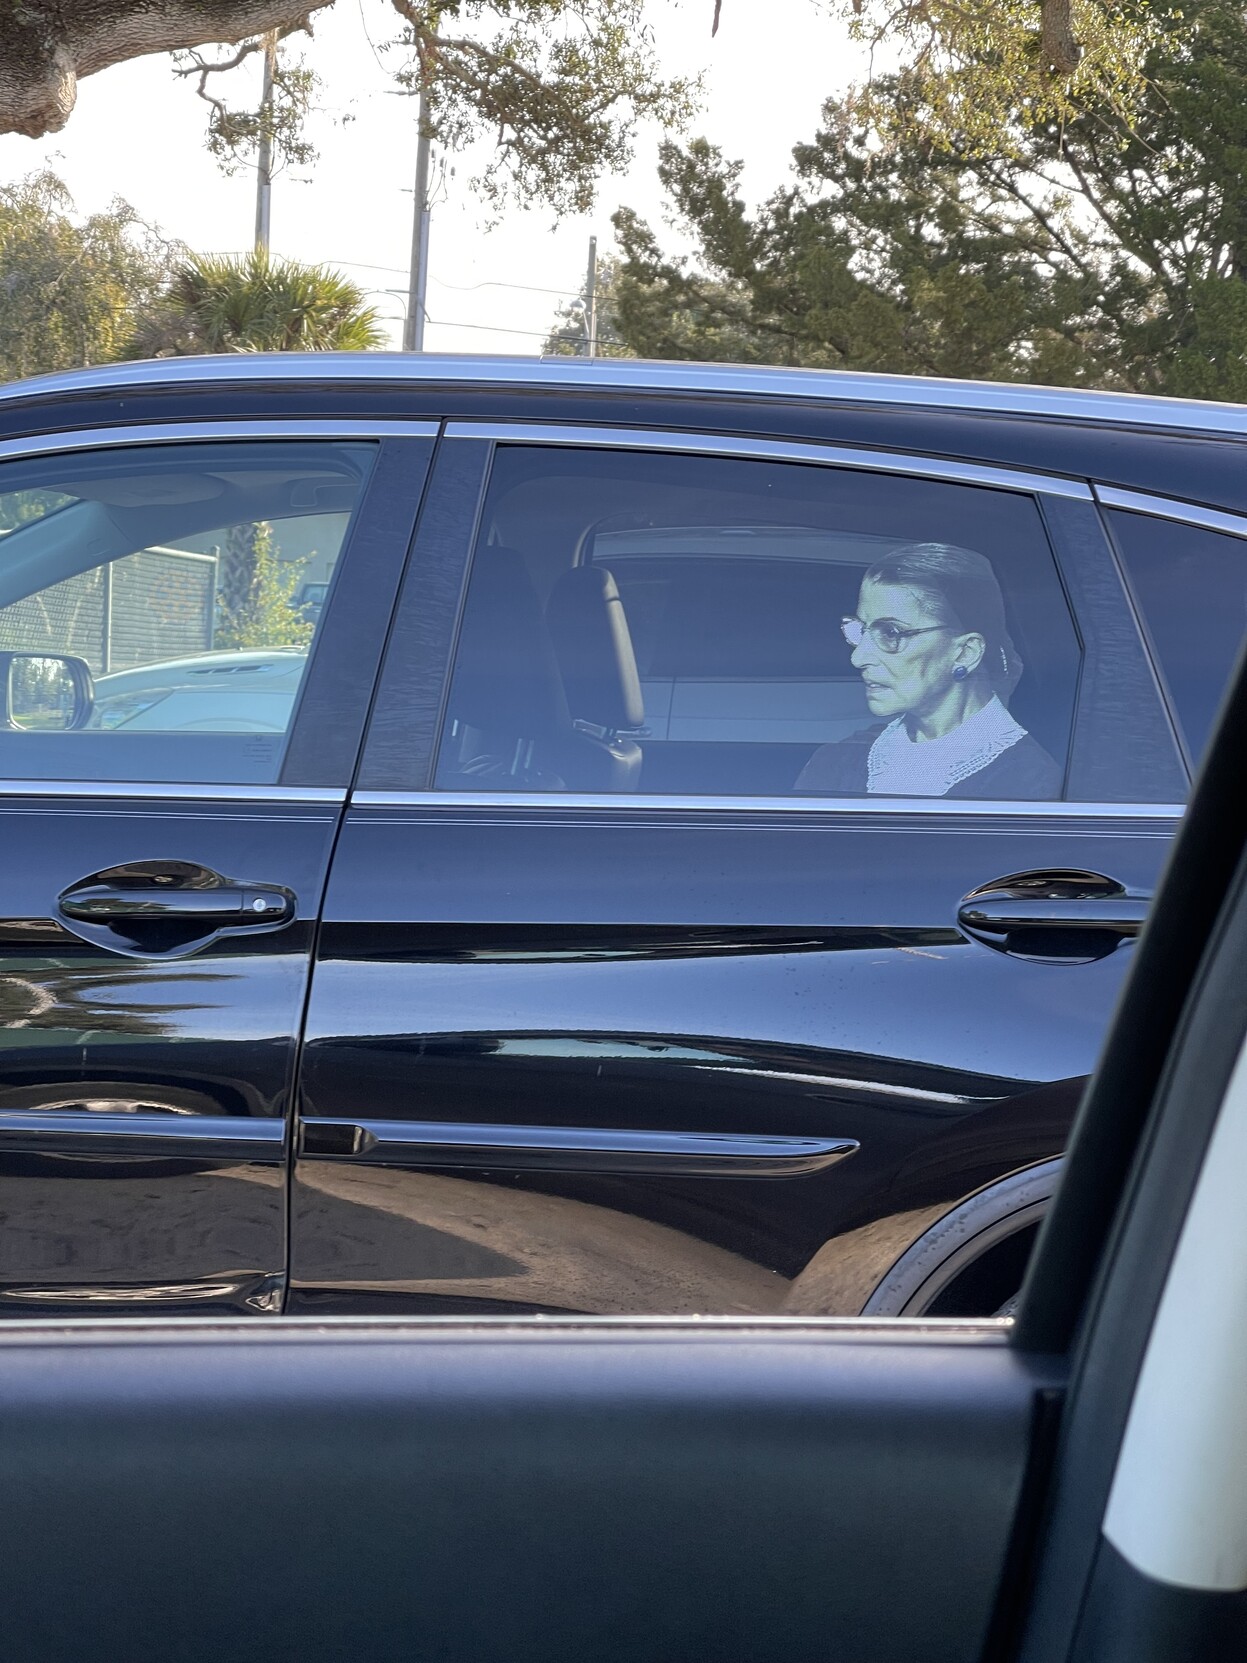 a creepy lifesize image of Ruth Bader Ginsburg through the window of a car in a parking lot.